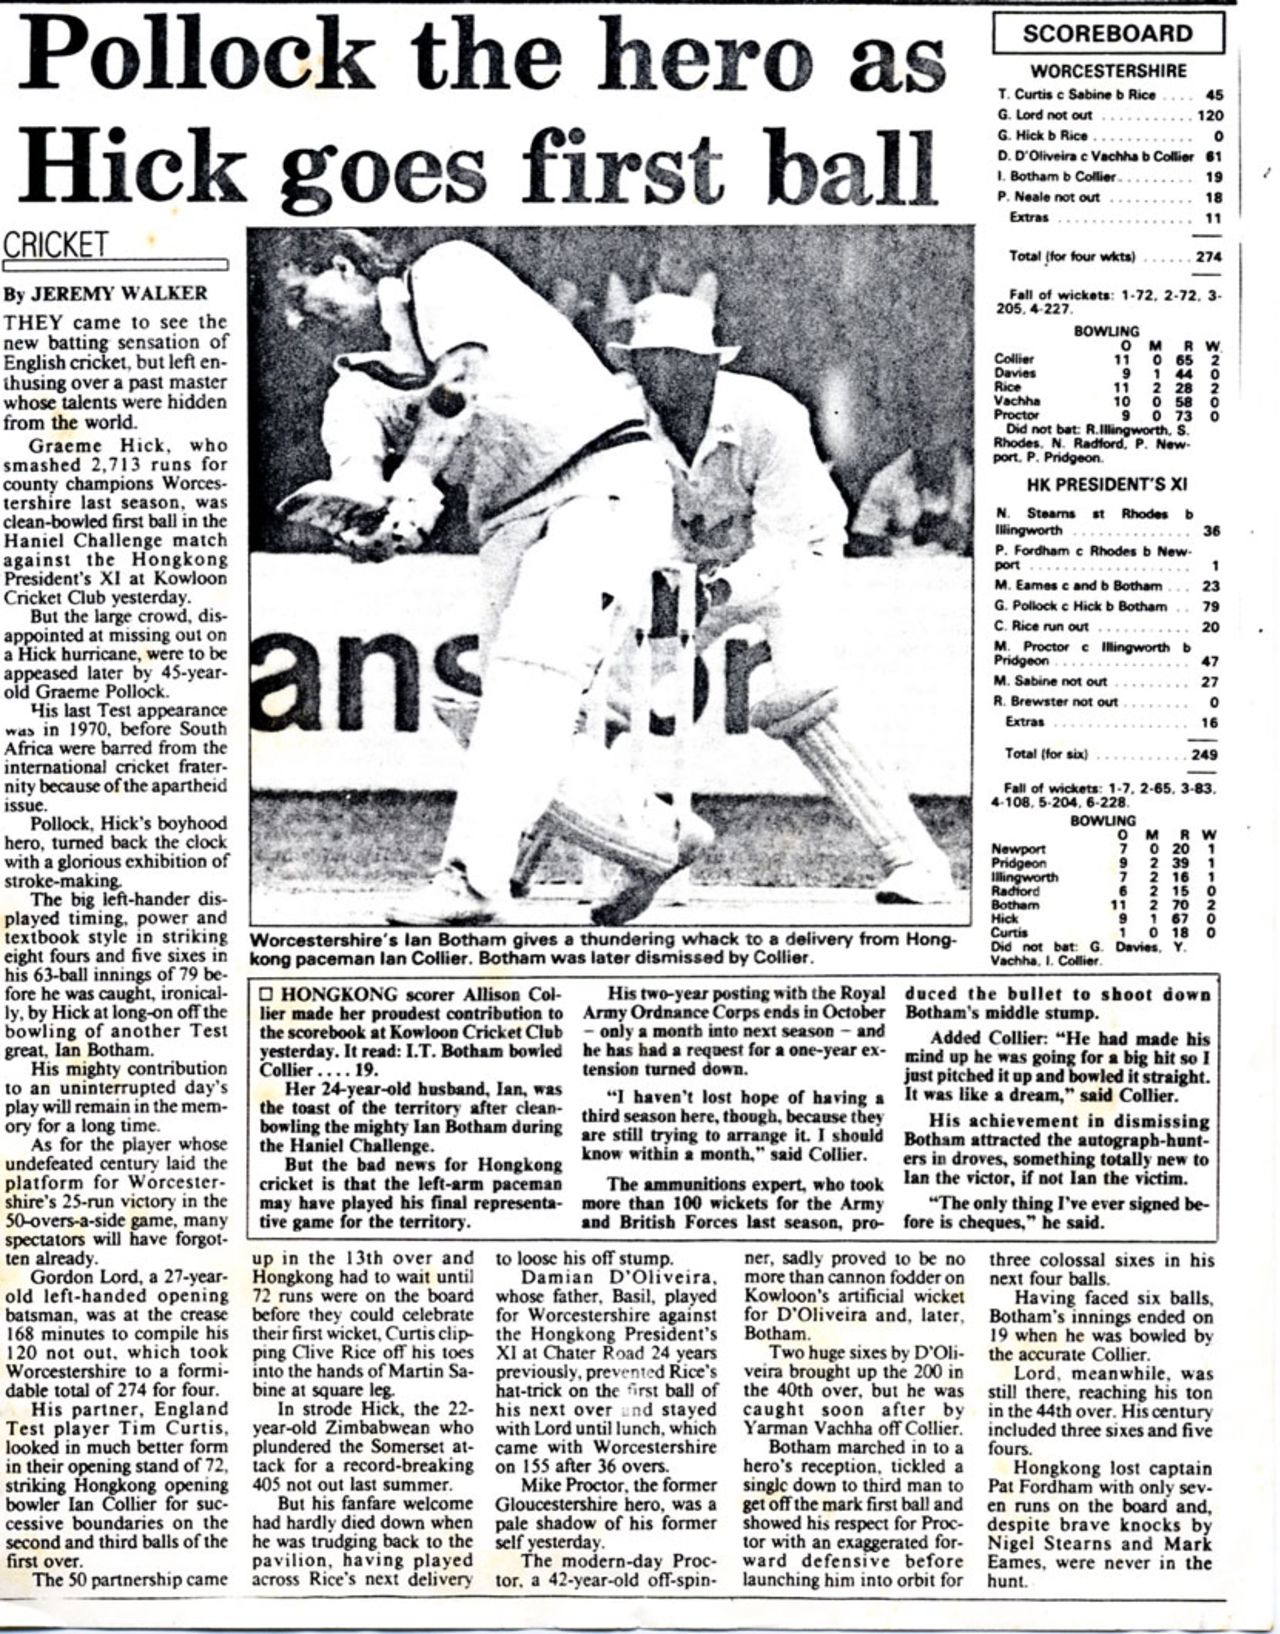 Newspaper coverage - Worcestershire CCC v. HKCA President's XI, Kowloon Cricket Club 11.04.1989